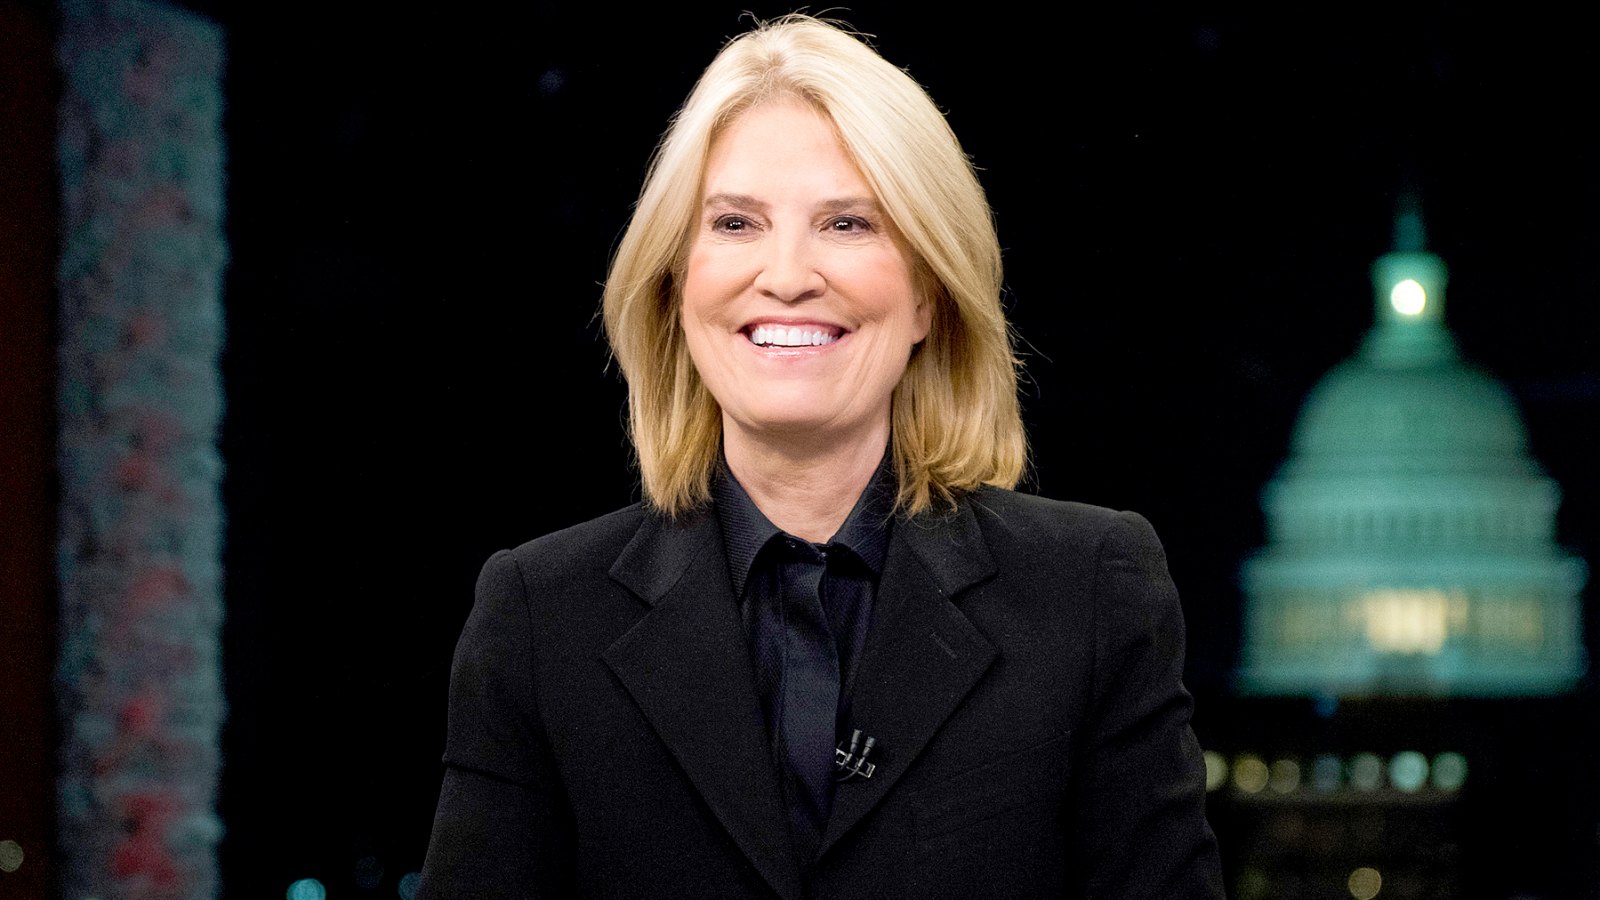 Greta van Susteren appears on the premiere episode of "For the Record with Greta" in Washington, D.C., Monday, January 9, 2017.